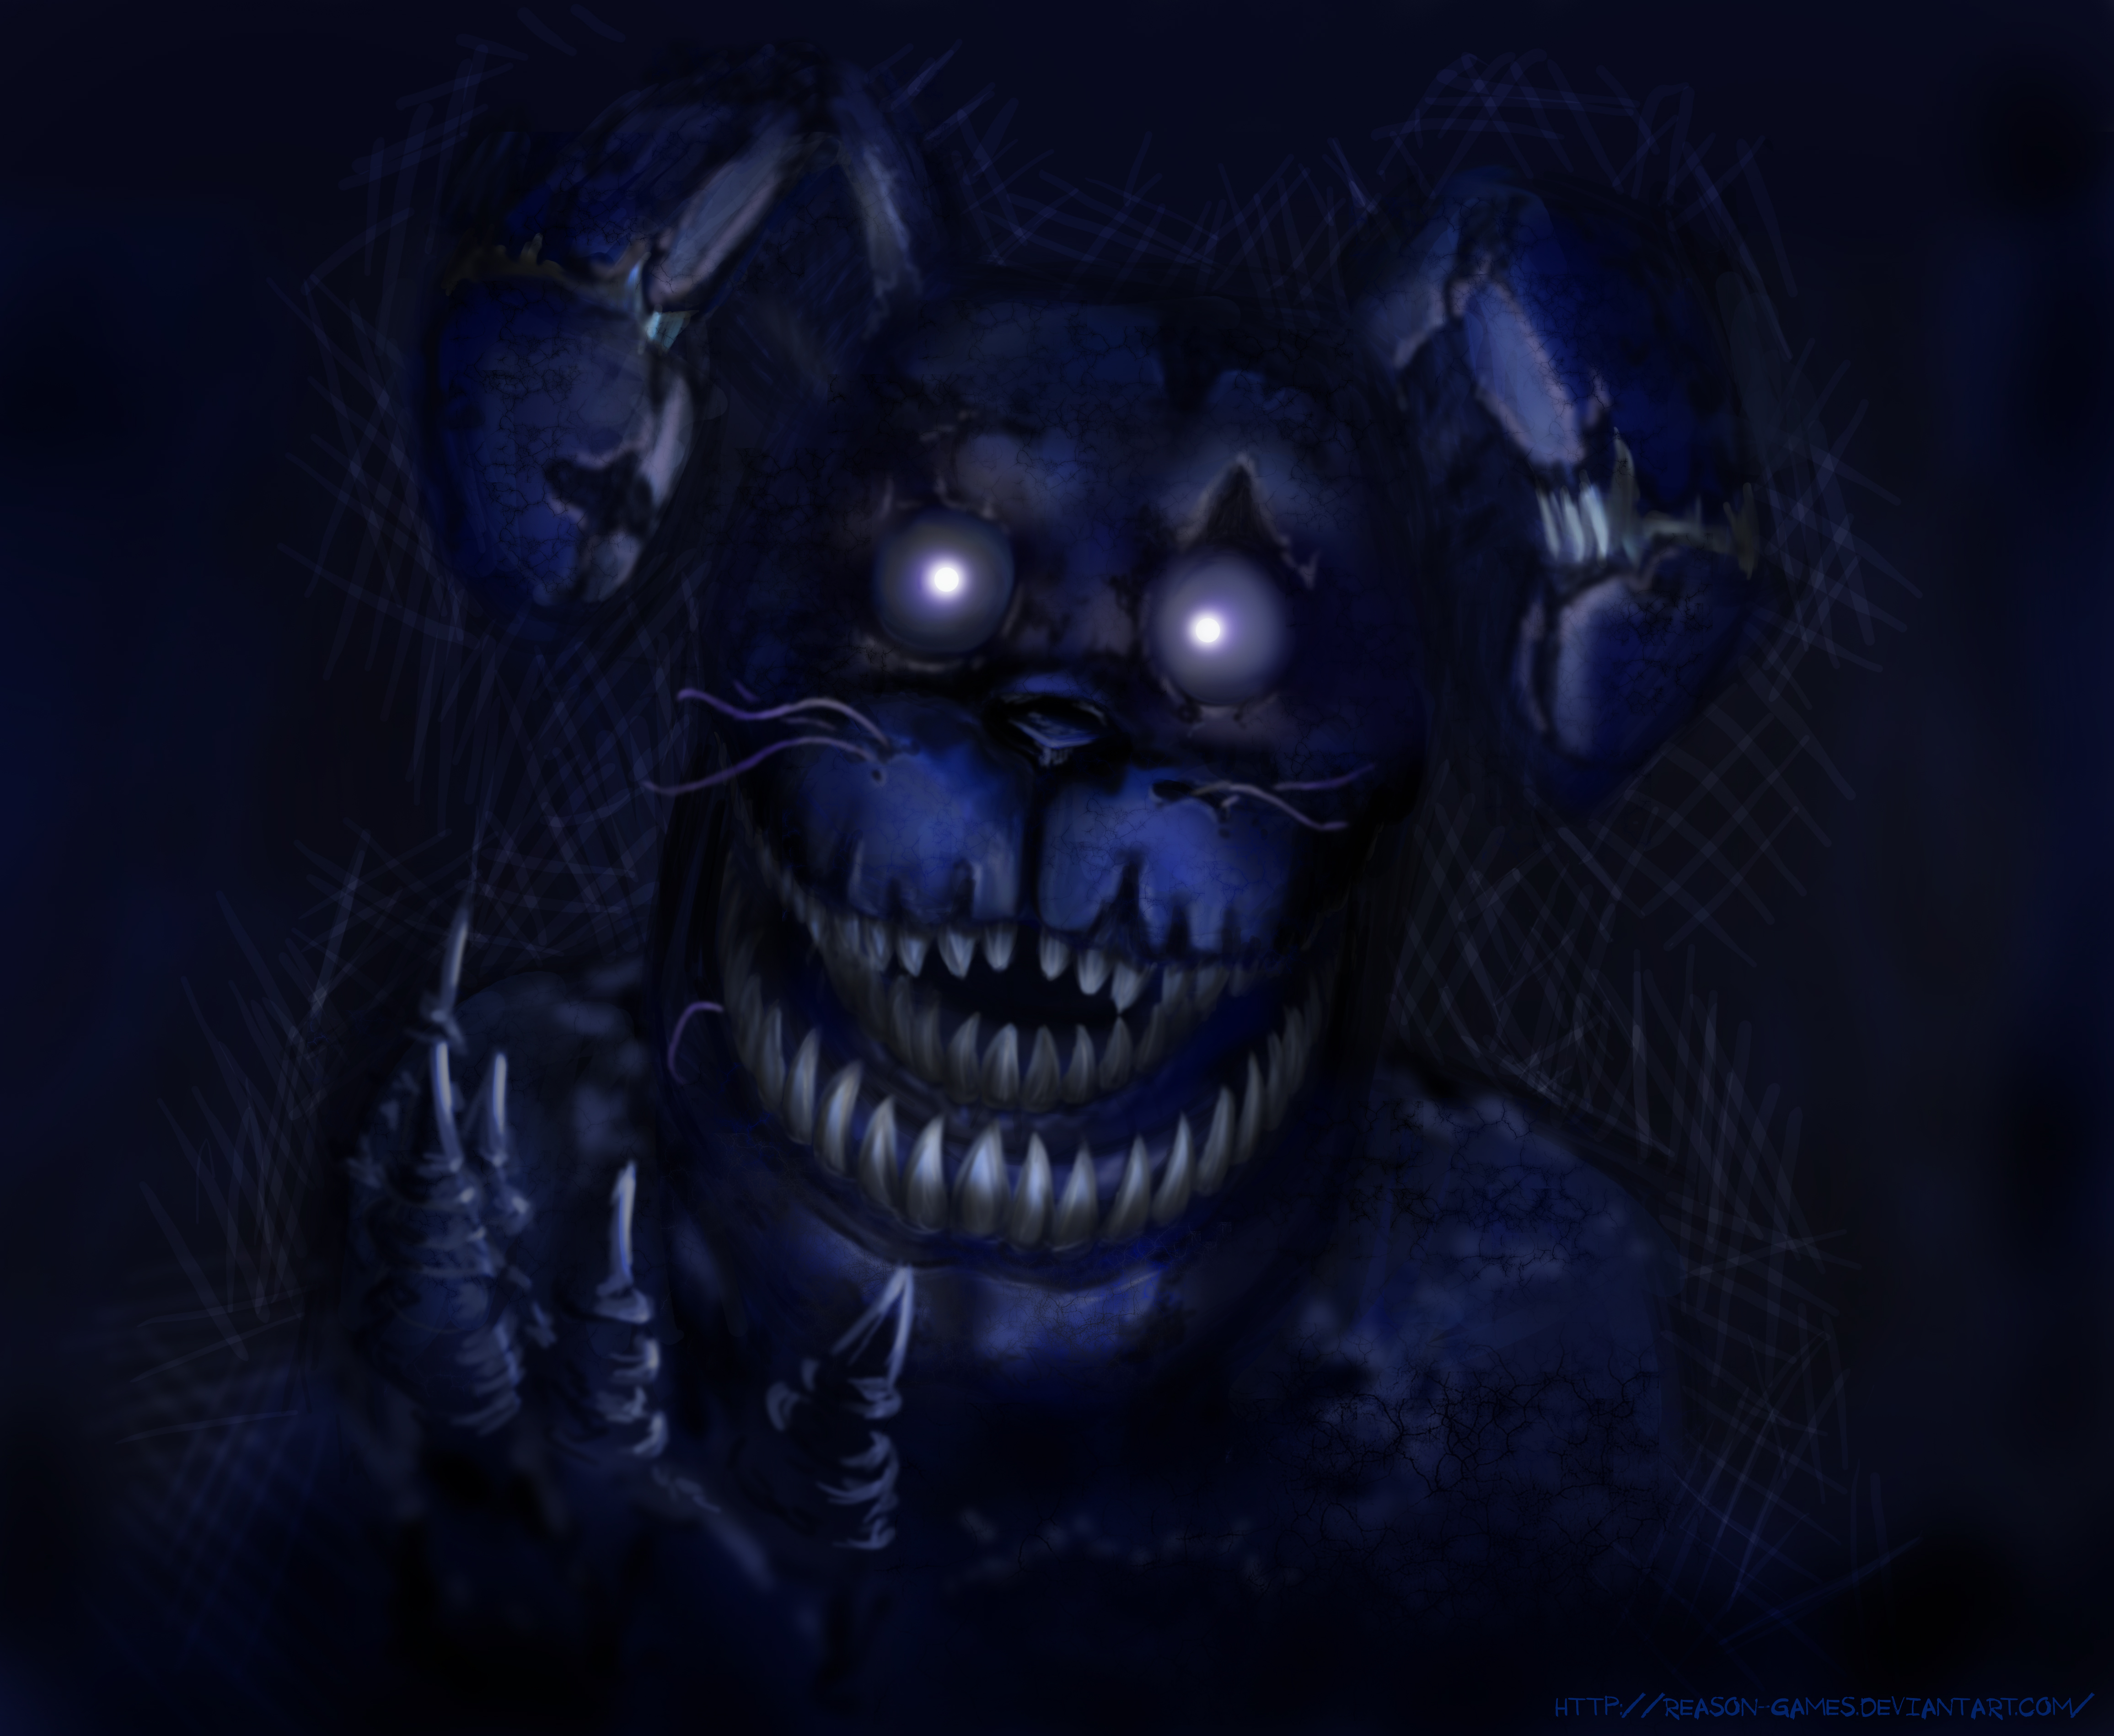 This hands down is the BEST nightmare bonnie fanart as of now I did